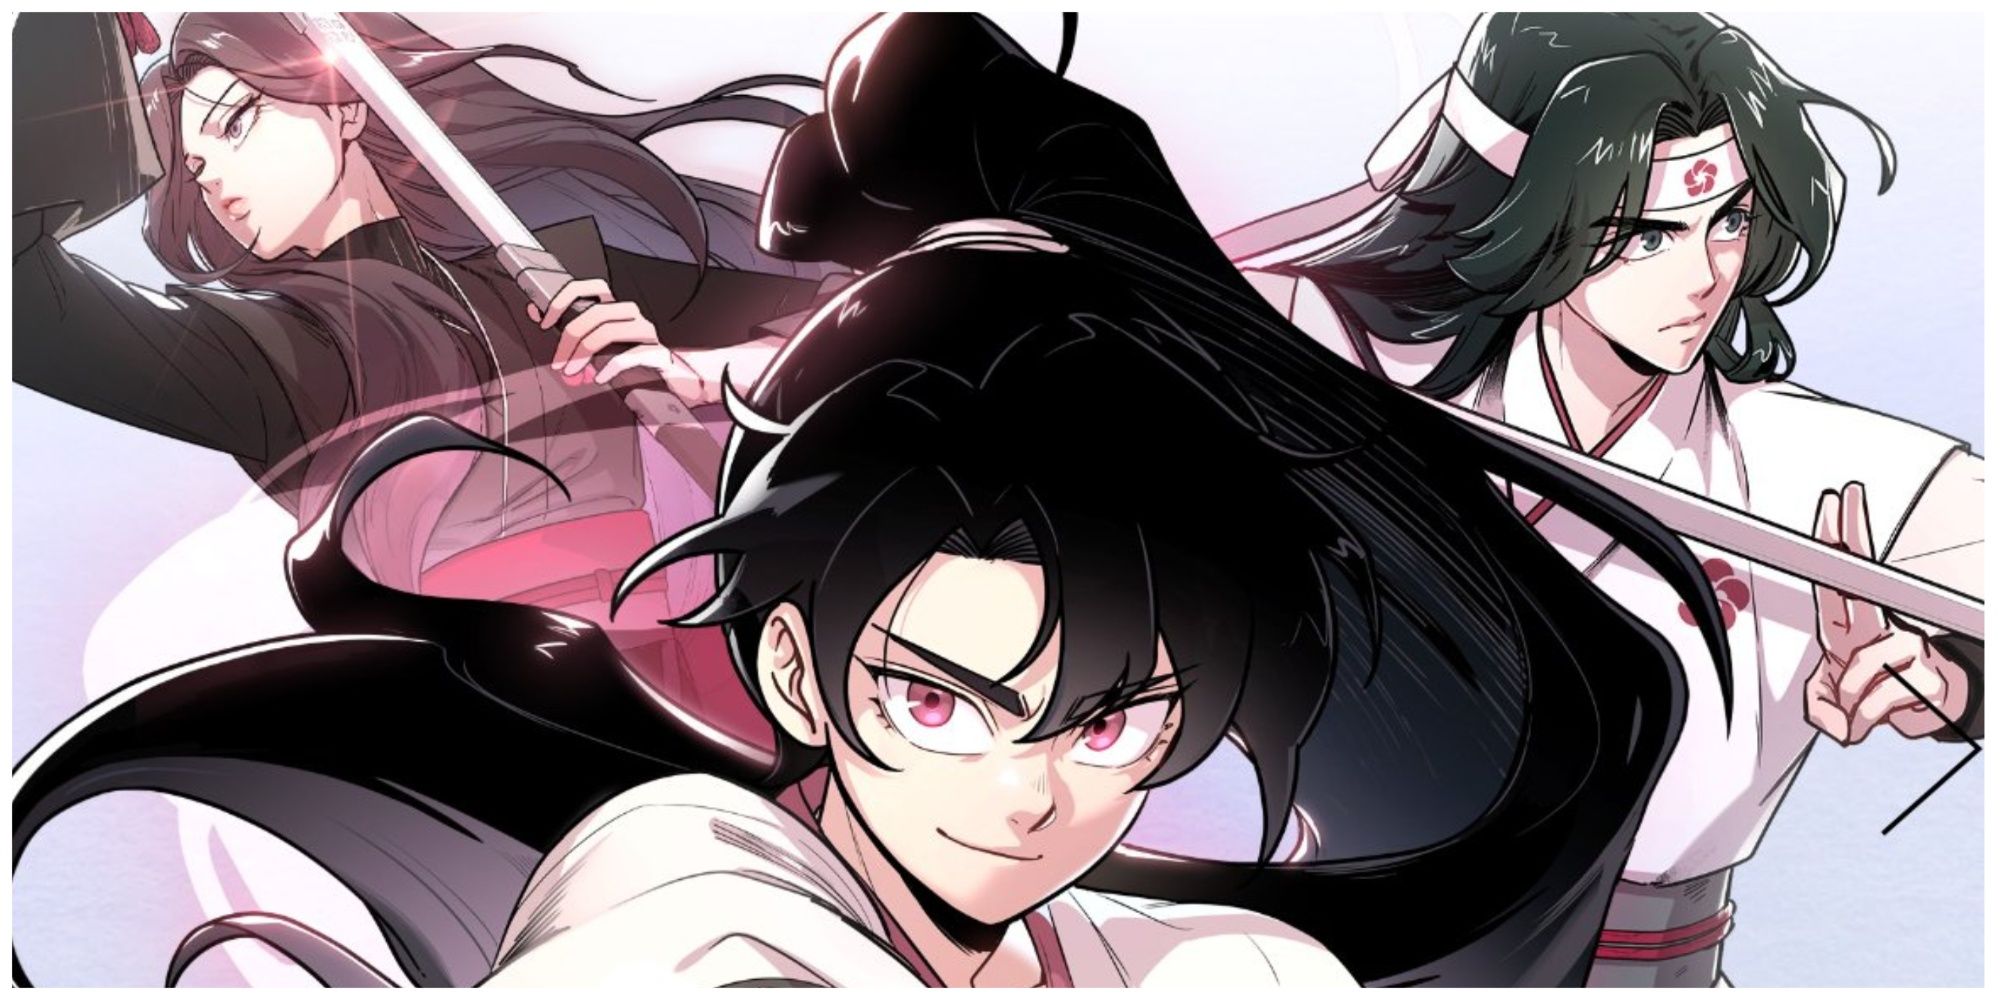 Return of the mount hua sect manhwa cover with main characters